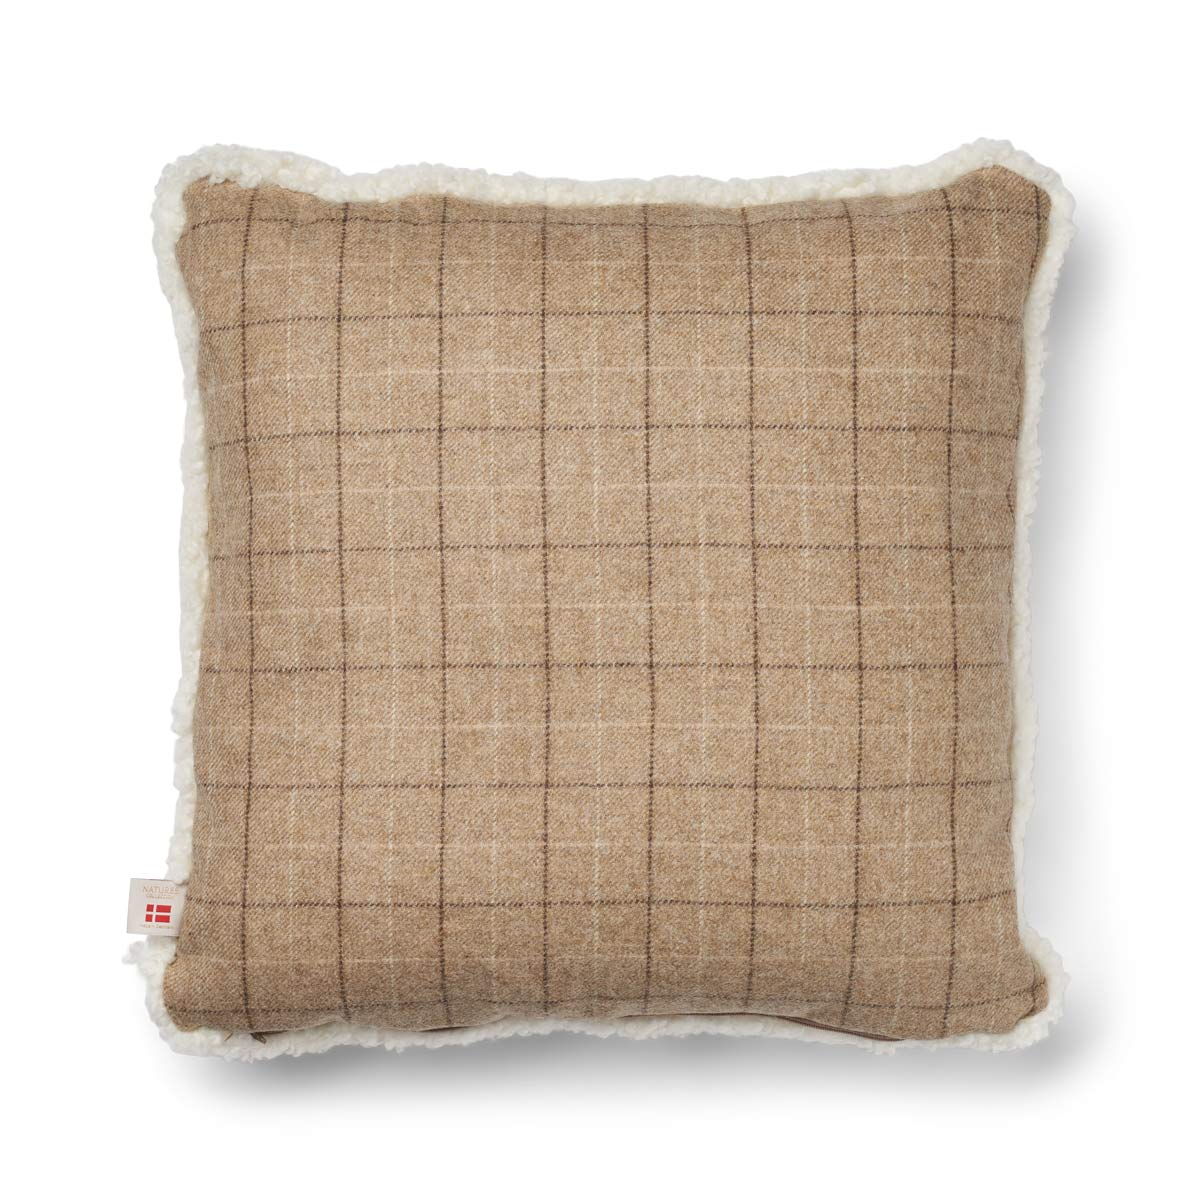 Checked Collection, Cushion One Side 100 % Wool, One Side SW New Zealand Sheepskin. Size: 52x52 cm.